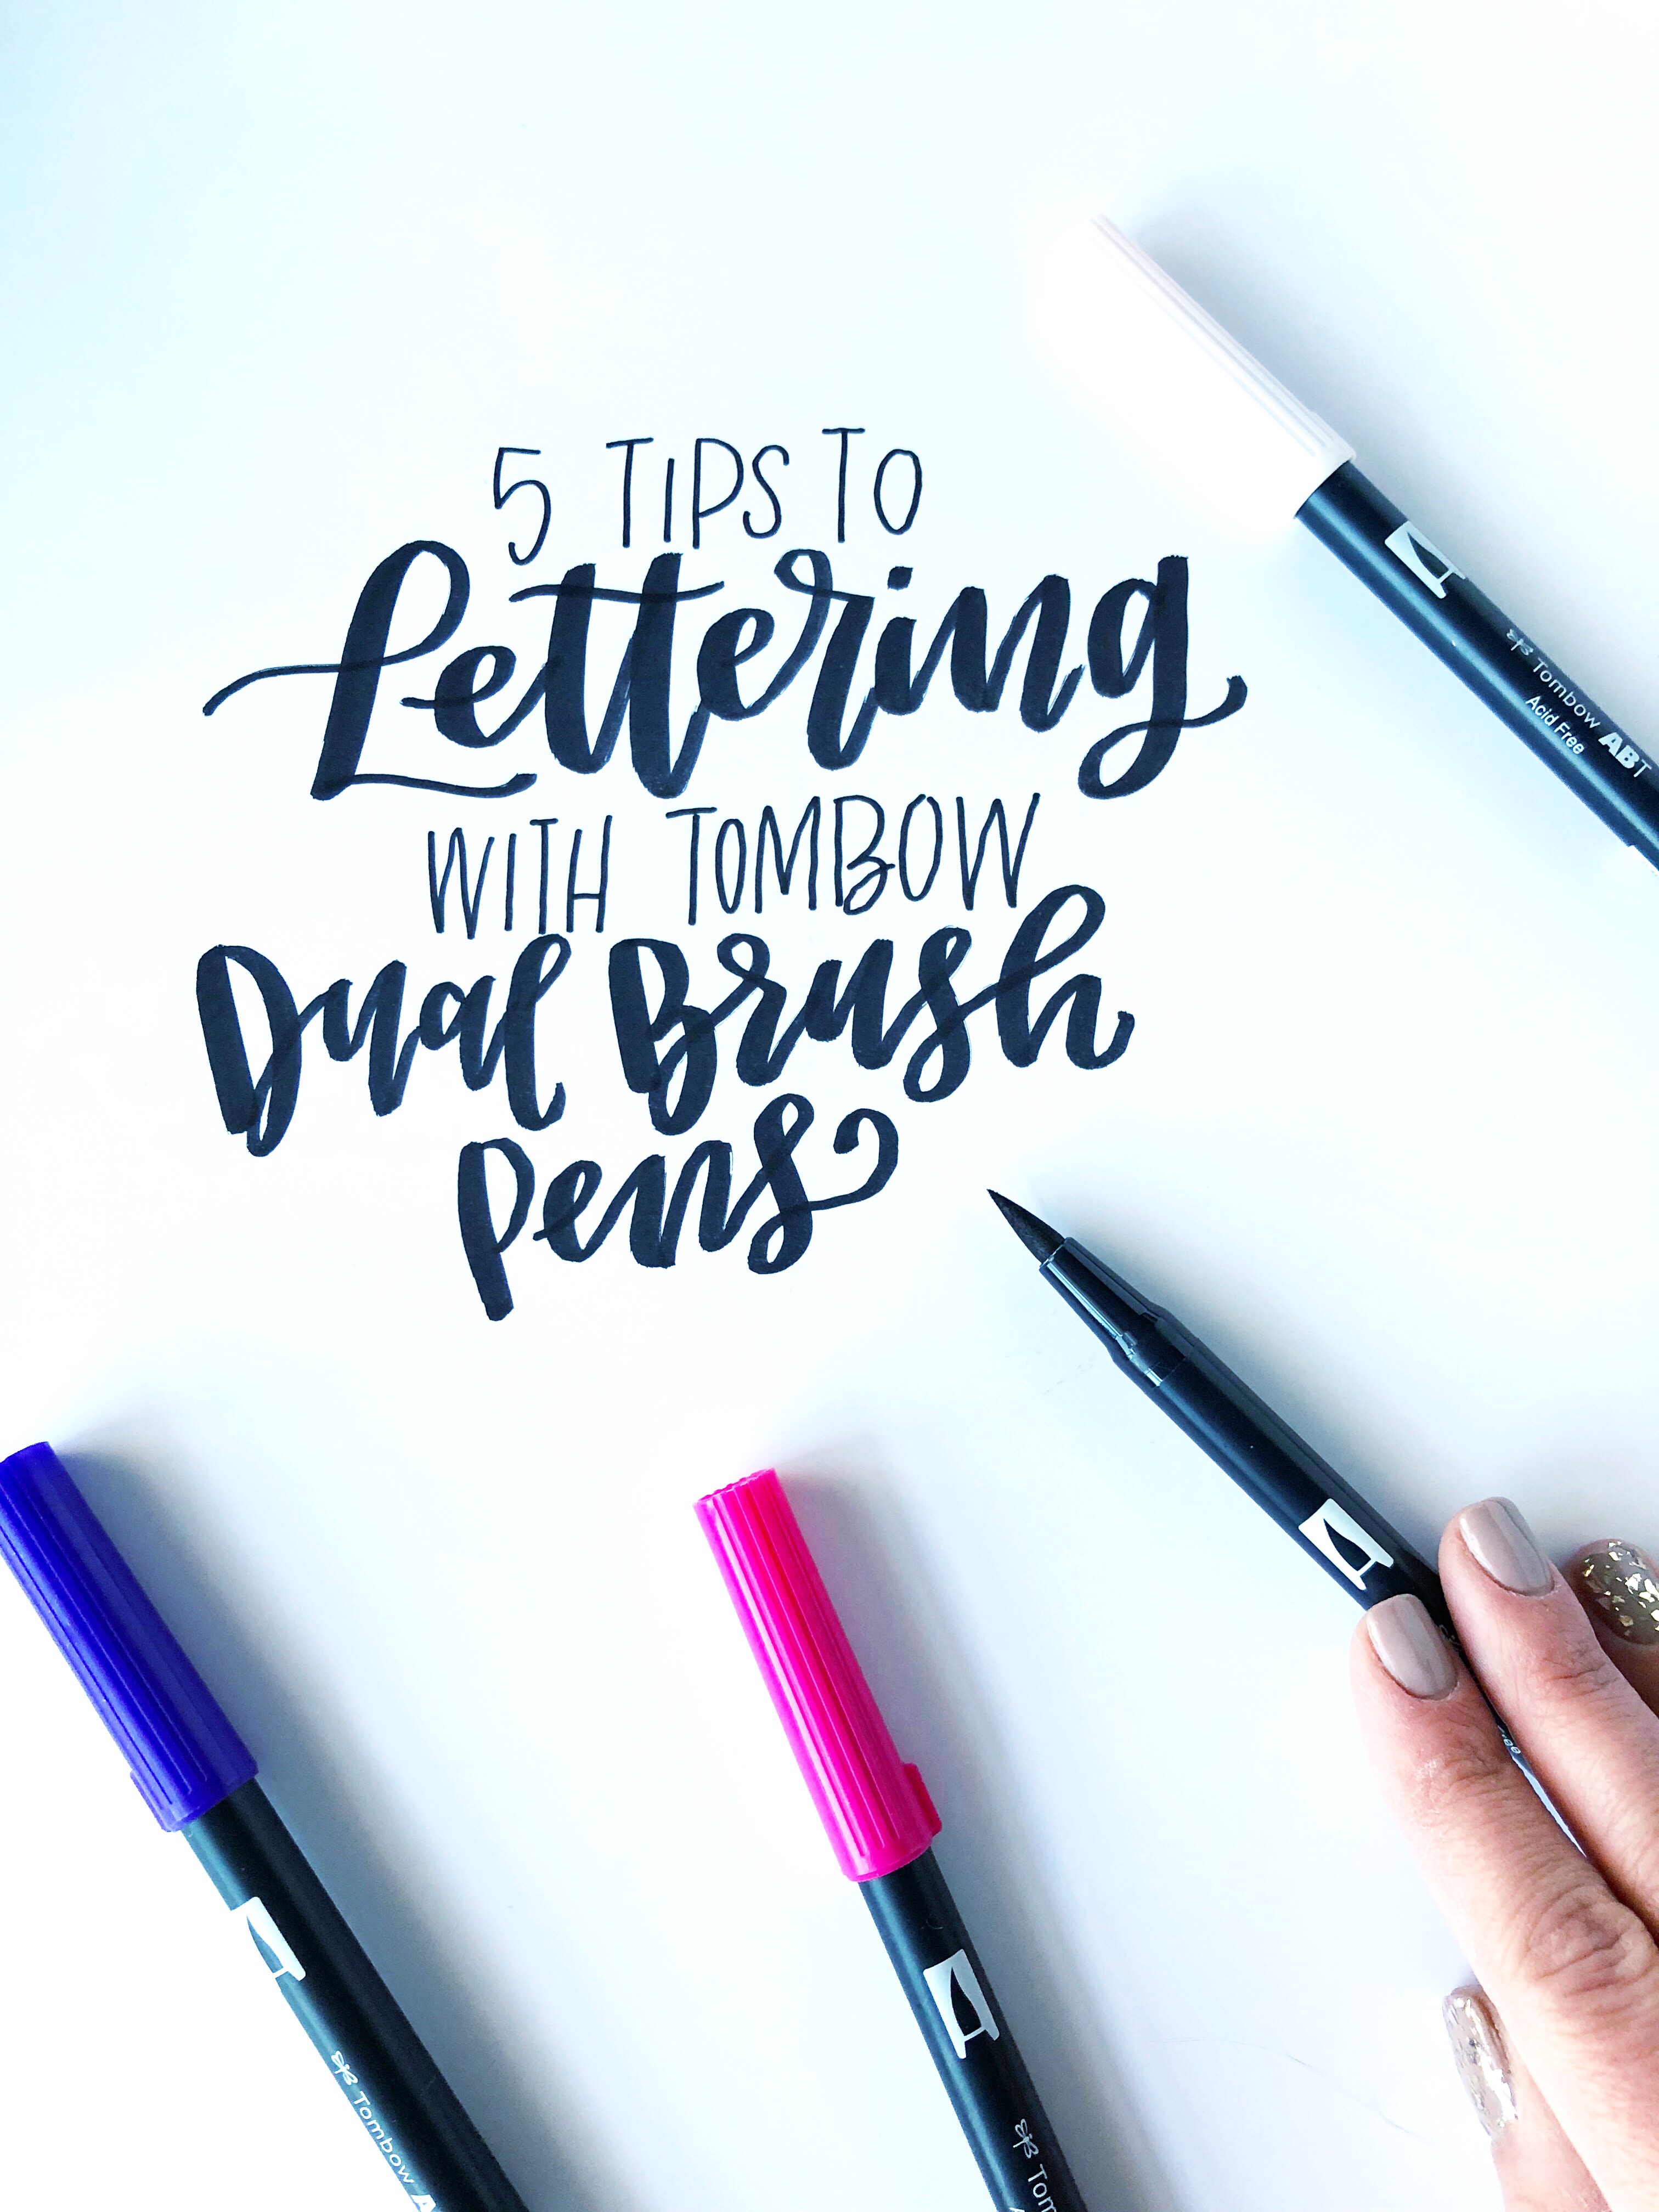 19 Tips to Lettering with Tombow Dual Brush Pens - Tombow USA Blog